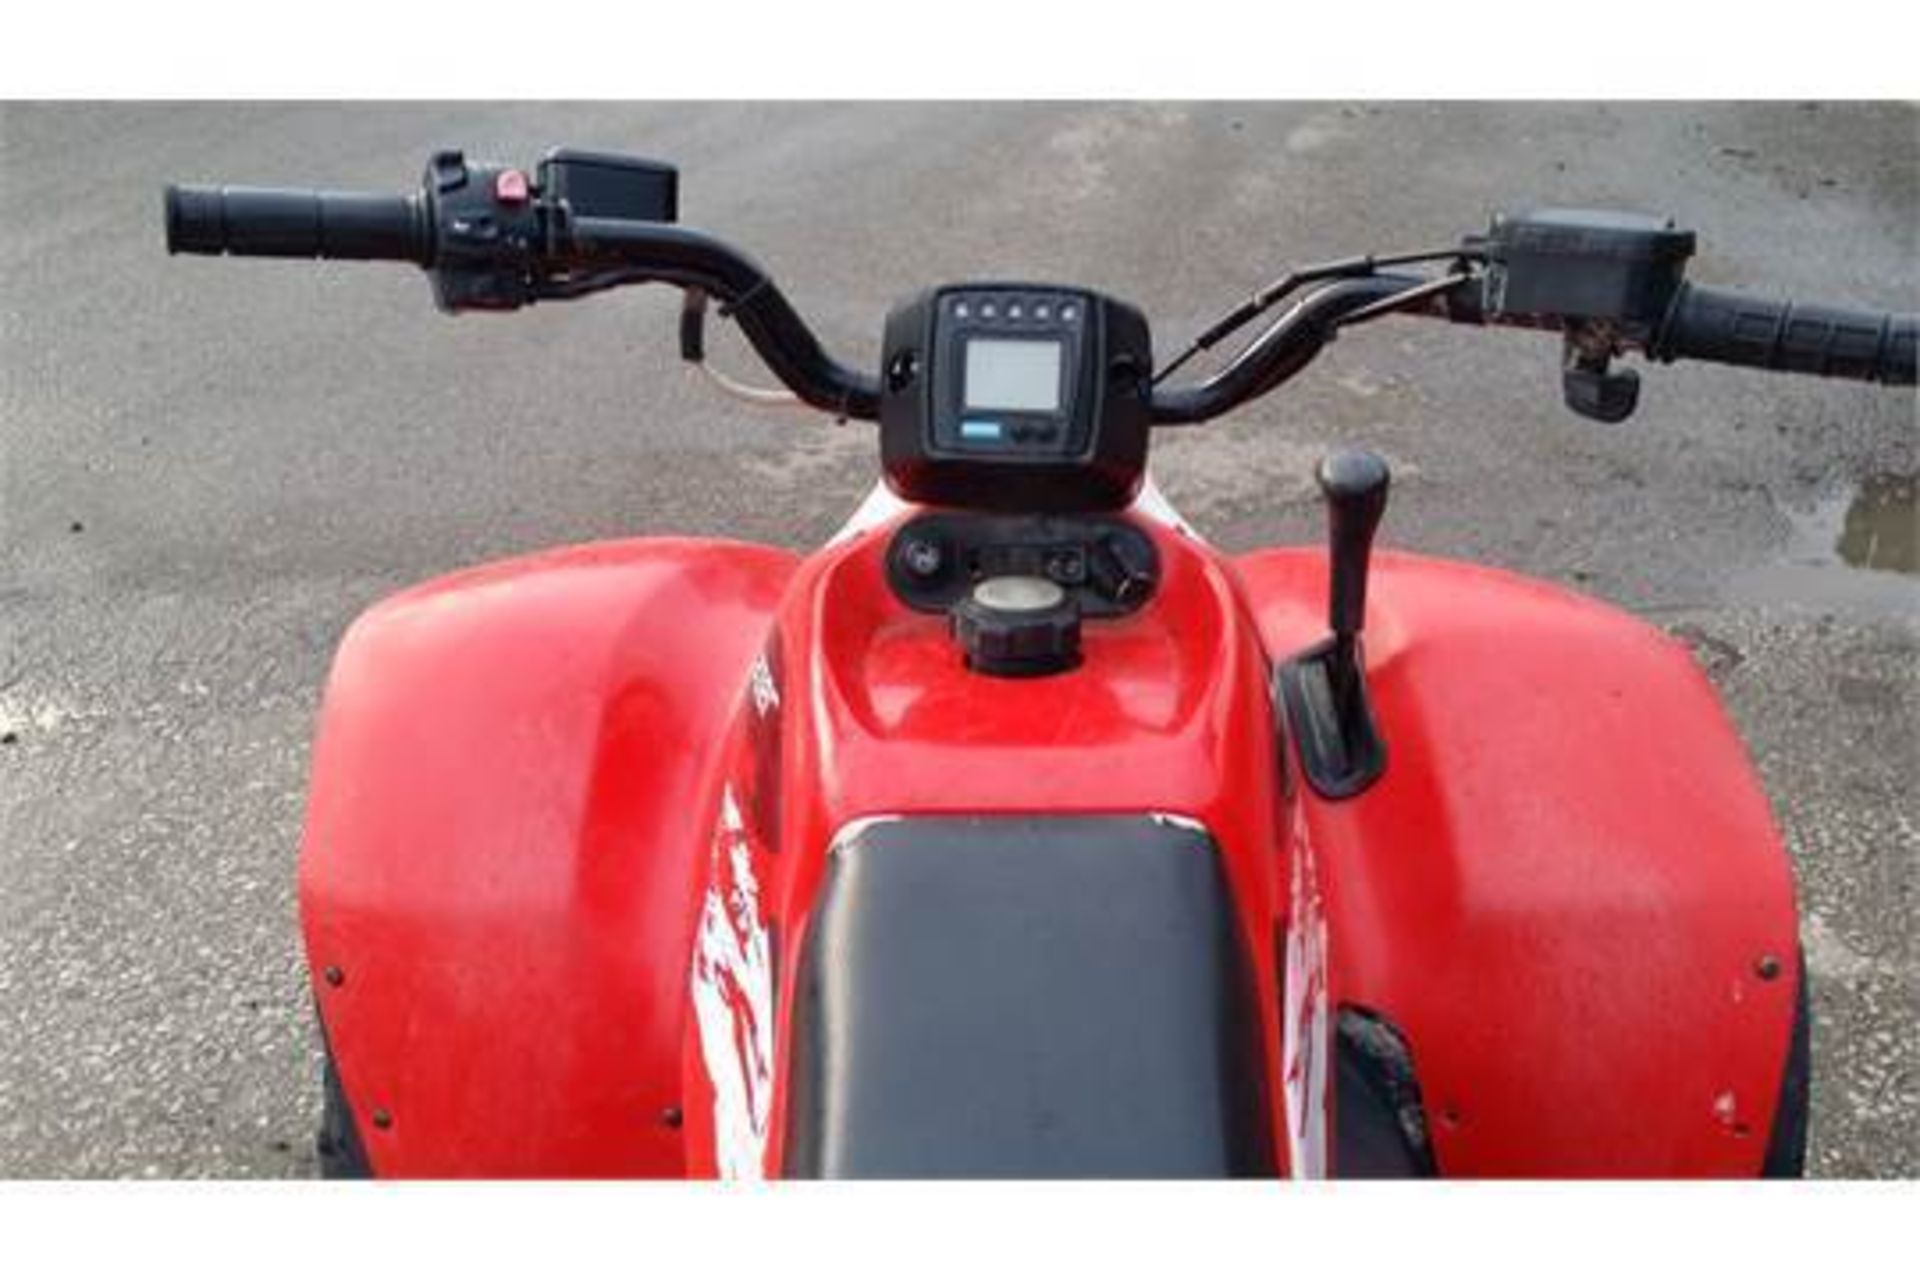 Polaris 330 Trail Blazer NO VAT Year 2002 Electric start Fully serviced Original tool kit Delivery - Image 6 of 6